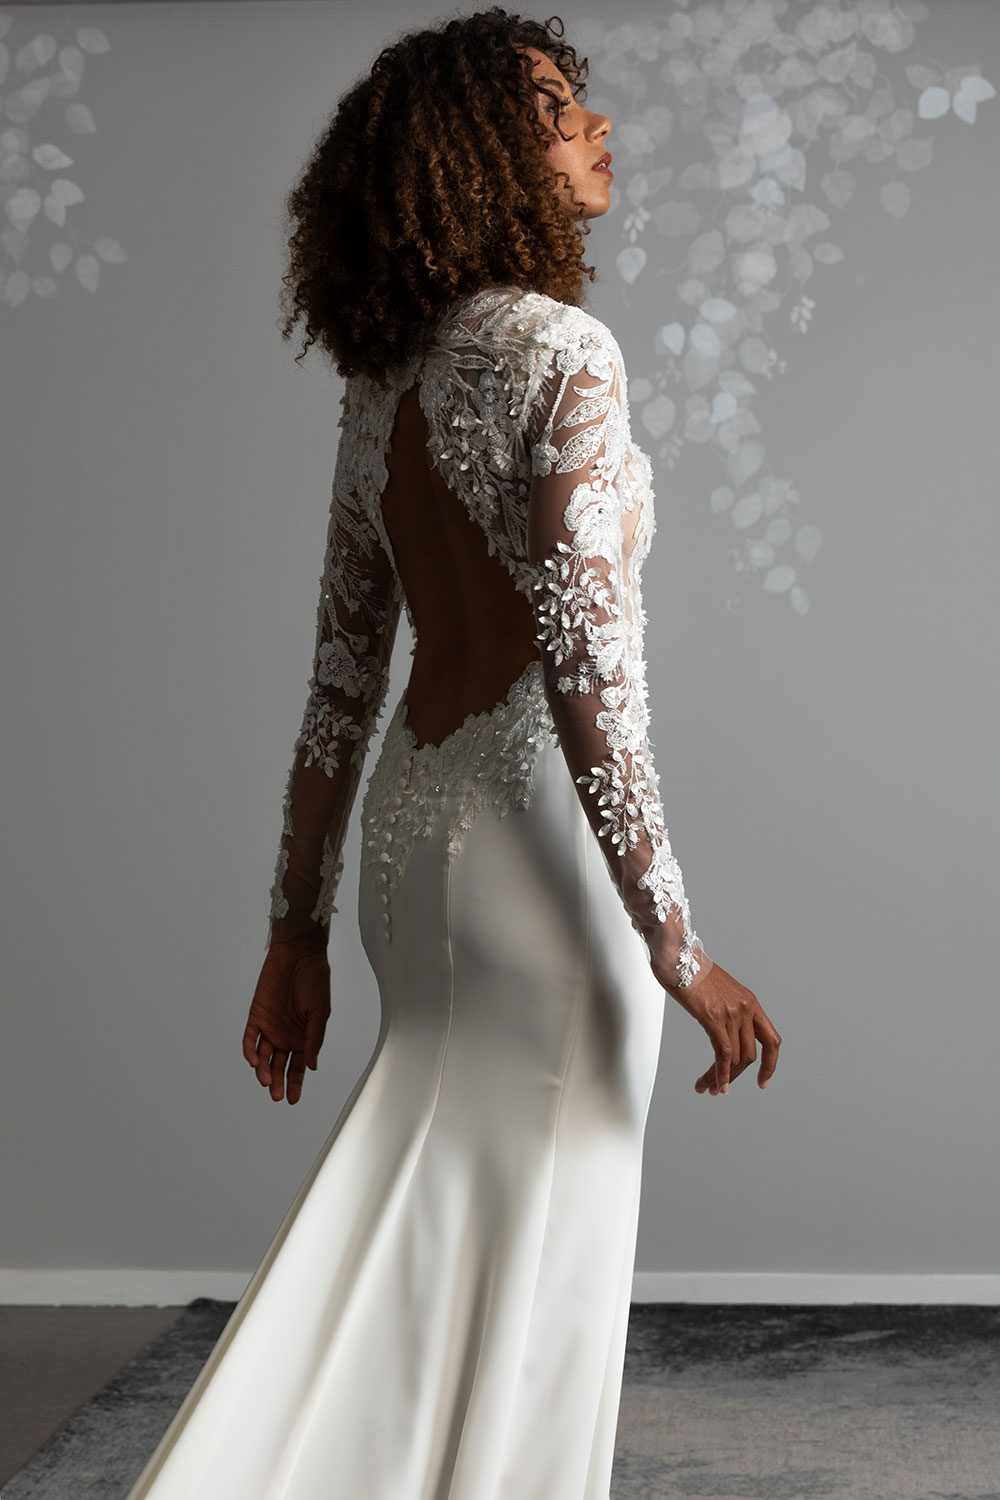 Moana Wedding gown from Vinka Design - Spectacular wedding dress perfect for the modern bride who still wants a classic spark! 3D lace embroidery complemented by a high neckline, fitted sleeves, and stunning low back into a flare train. Close up of low back with 3D lace embroidery and long sleeves